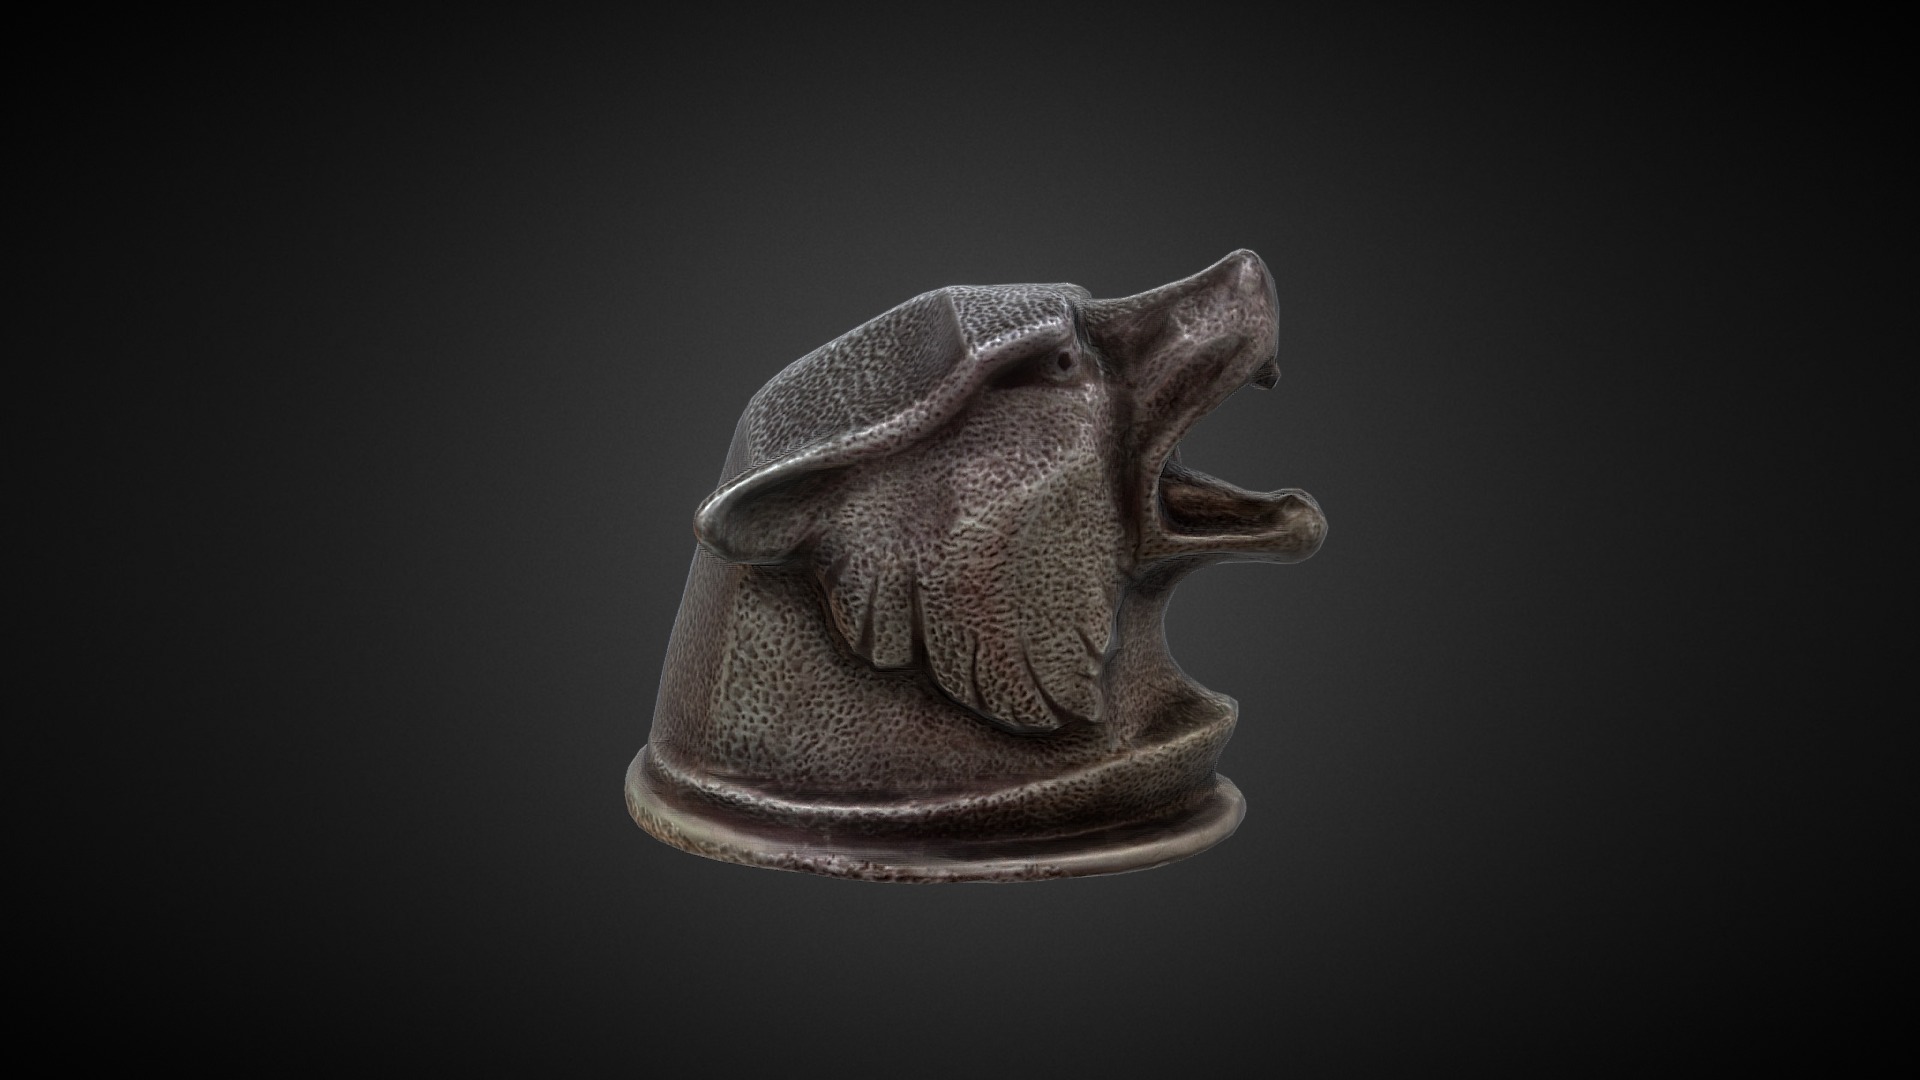 3D model Wolf head asset - This is a 3D model of the Wolf head asset. The 3D model is about a stone sculpture of a head.